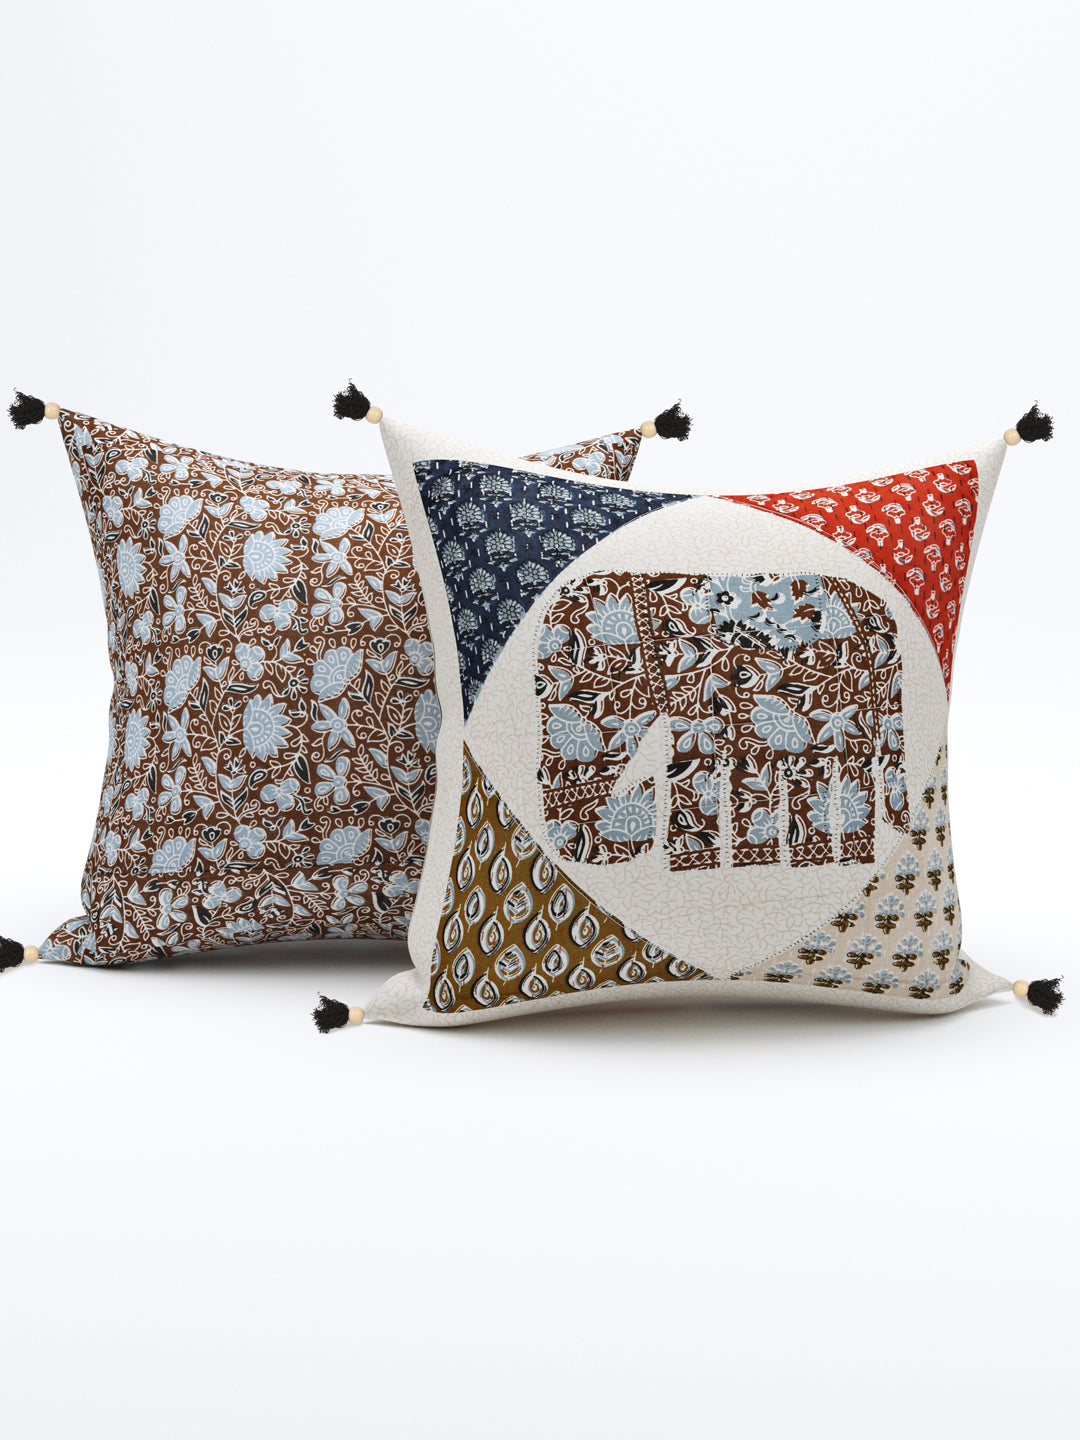 Living Roots Elephant Patchwork Cotton Cushion Cover- Set of 5 (40-028-B)